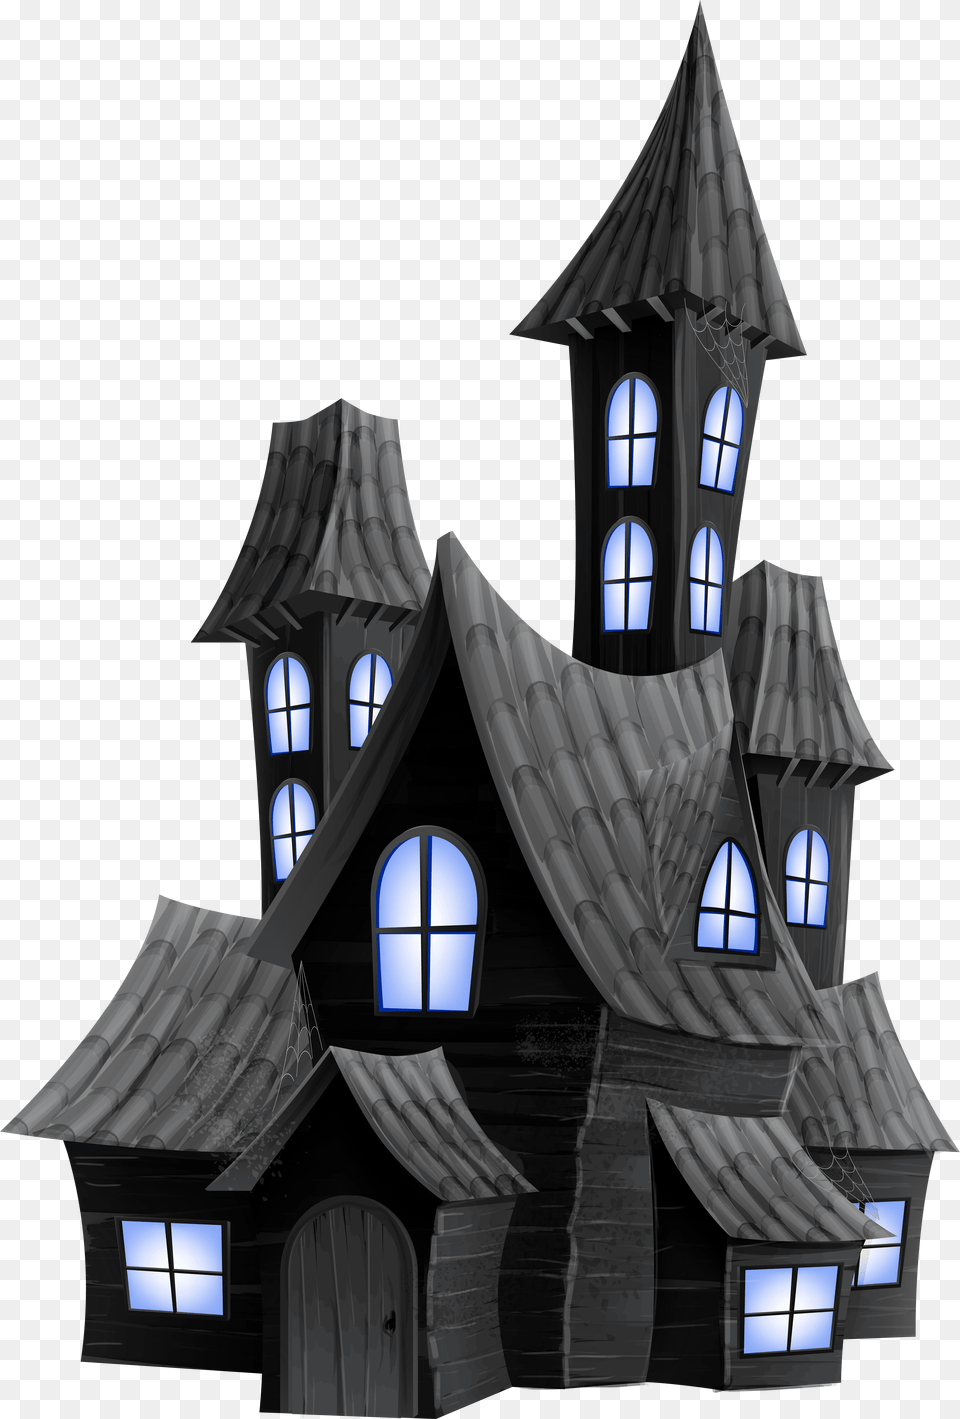 Ghost Scary Halloween House Scary House Clip Art Free Transparent Png